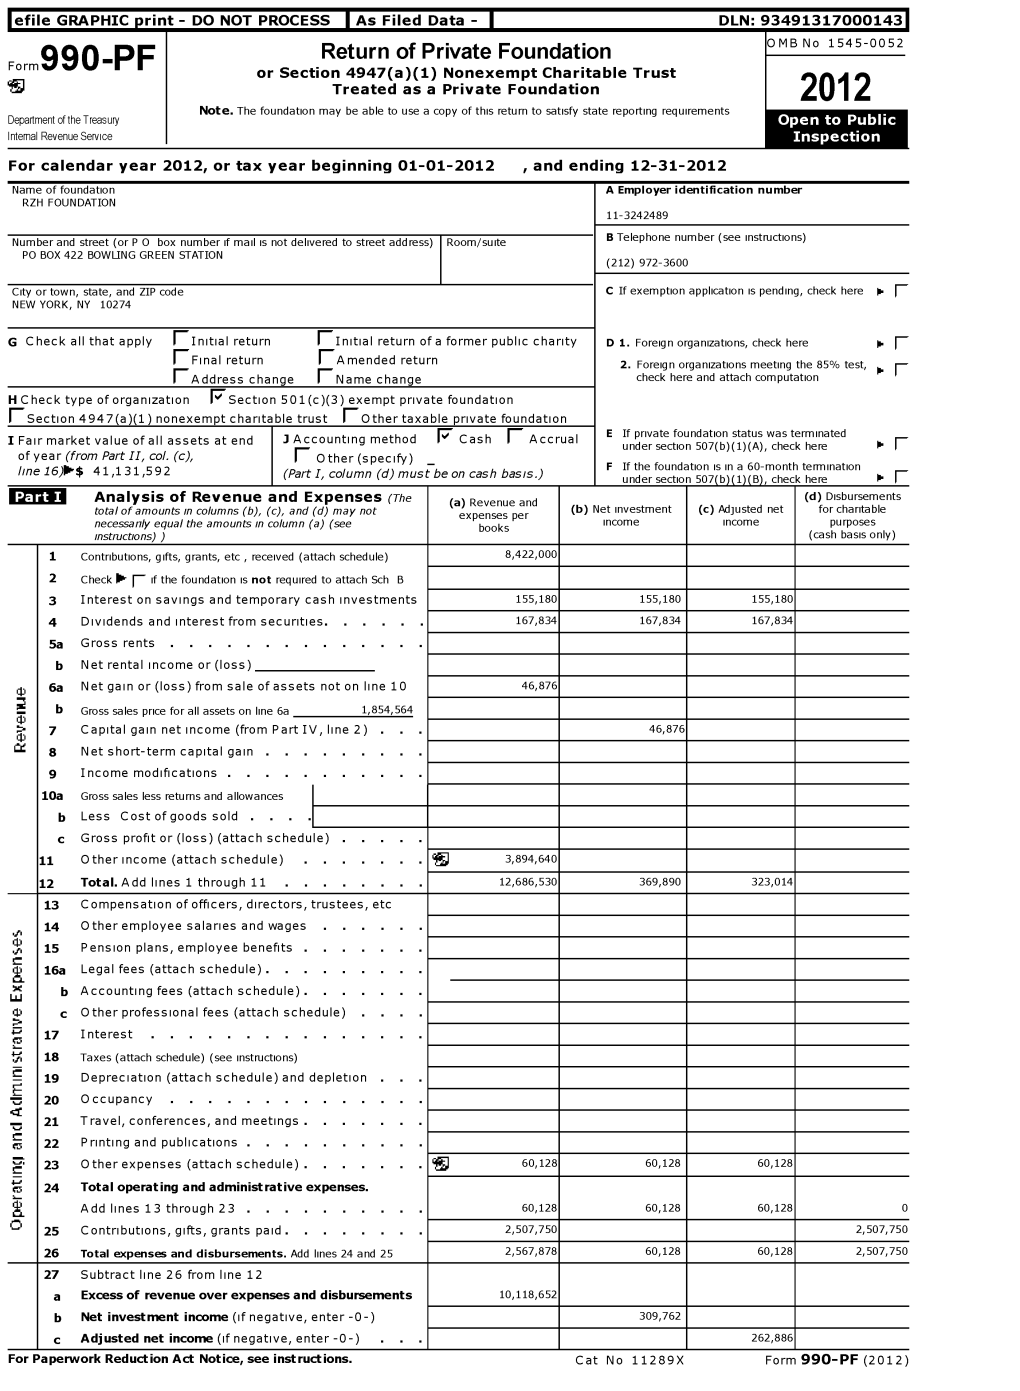 Return of Private Foundation OMB No 1545-0052 Form 990 -PF Or Section 4947 ( A)(1) Nonexempt Charitable Trust ` Treated As a Private Foundation 2012 Note